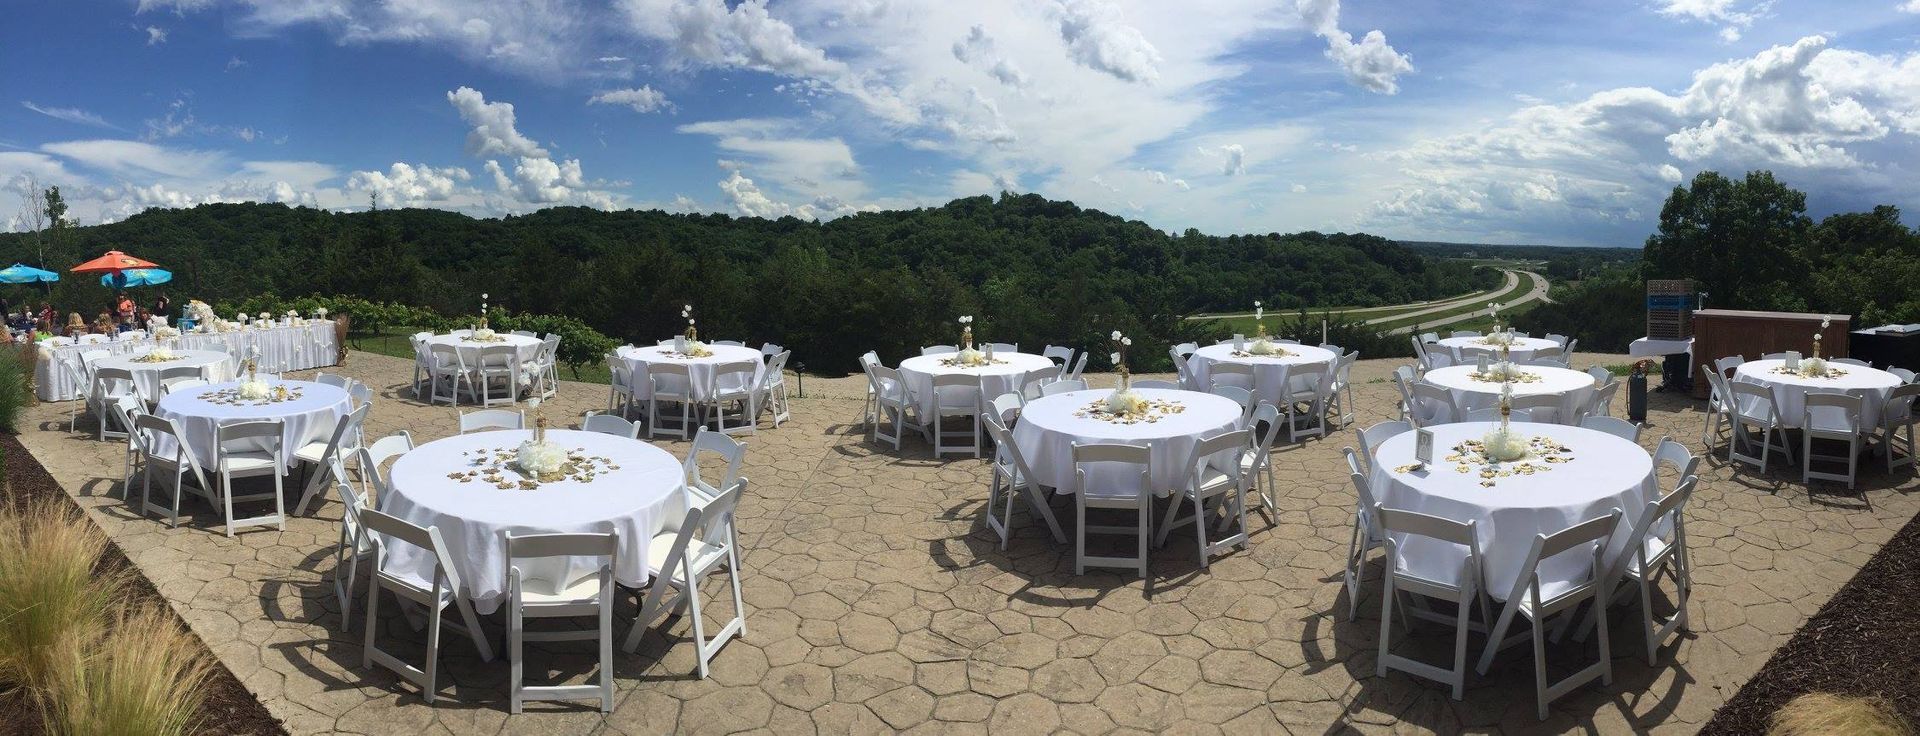 The Hill Can Set up Tables & Chairs on Our Large South Patio for Your Private Event in Mid-Missouri